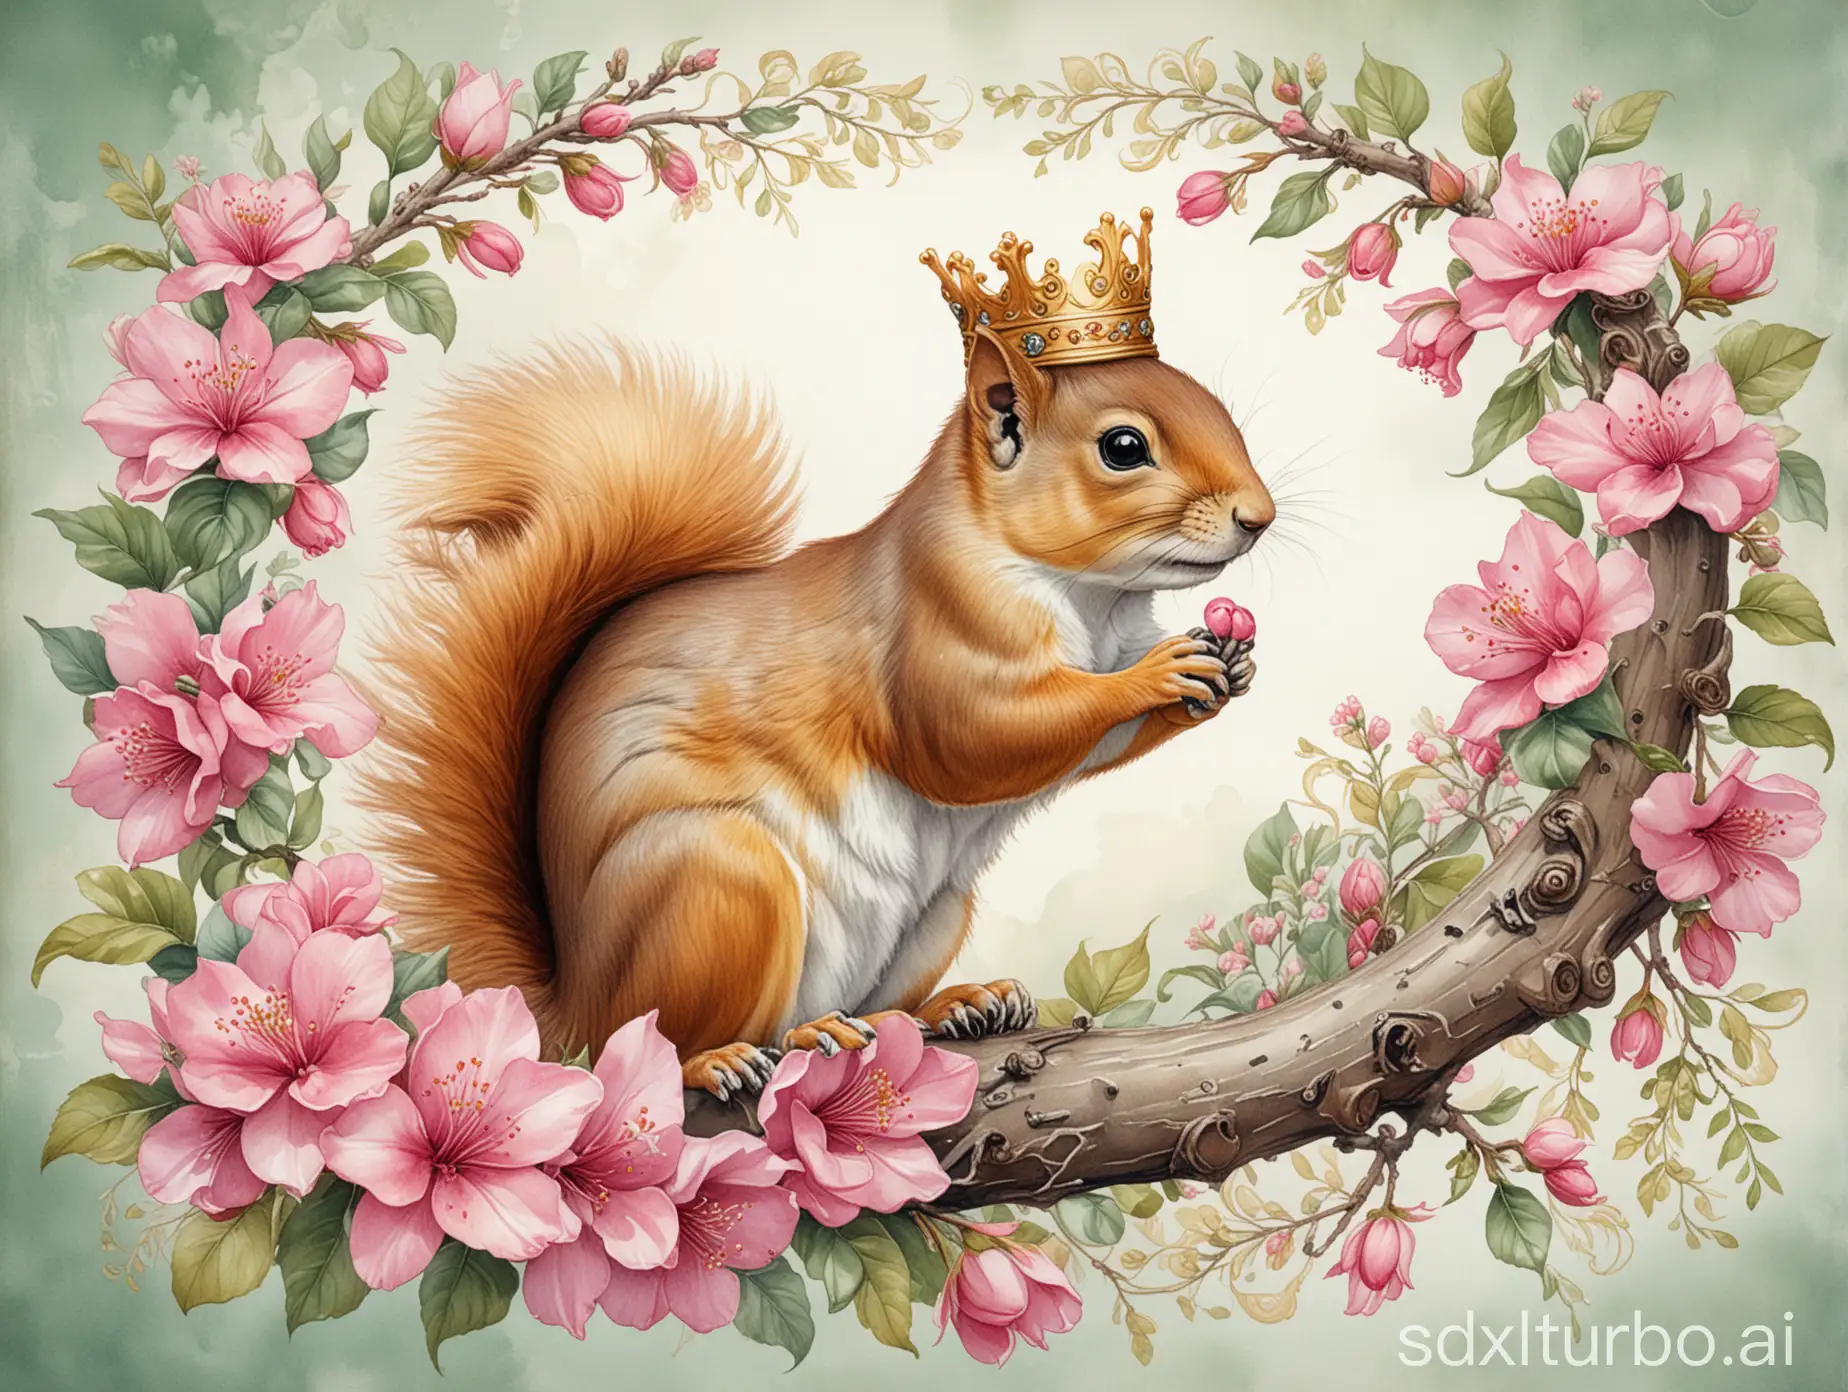 A squirrel crowned with a golden crown sits on a branch, the branch has green leaves and pink blossoms, highly and delicately detailed drawing, intricate watercolor, art nouveau borders